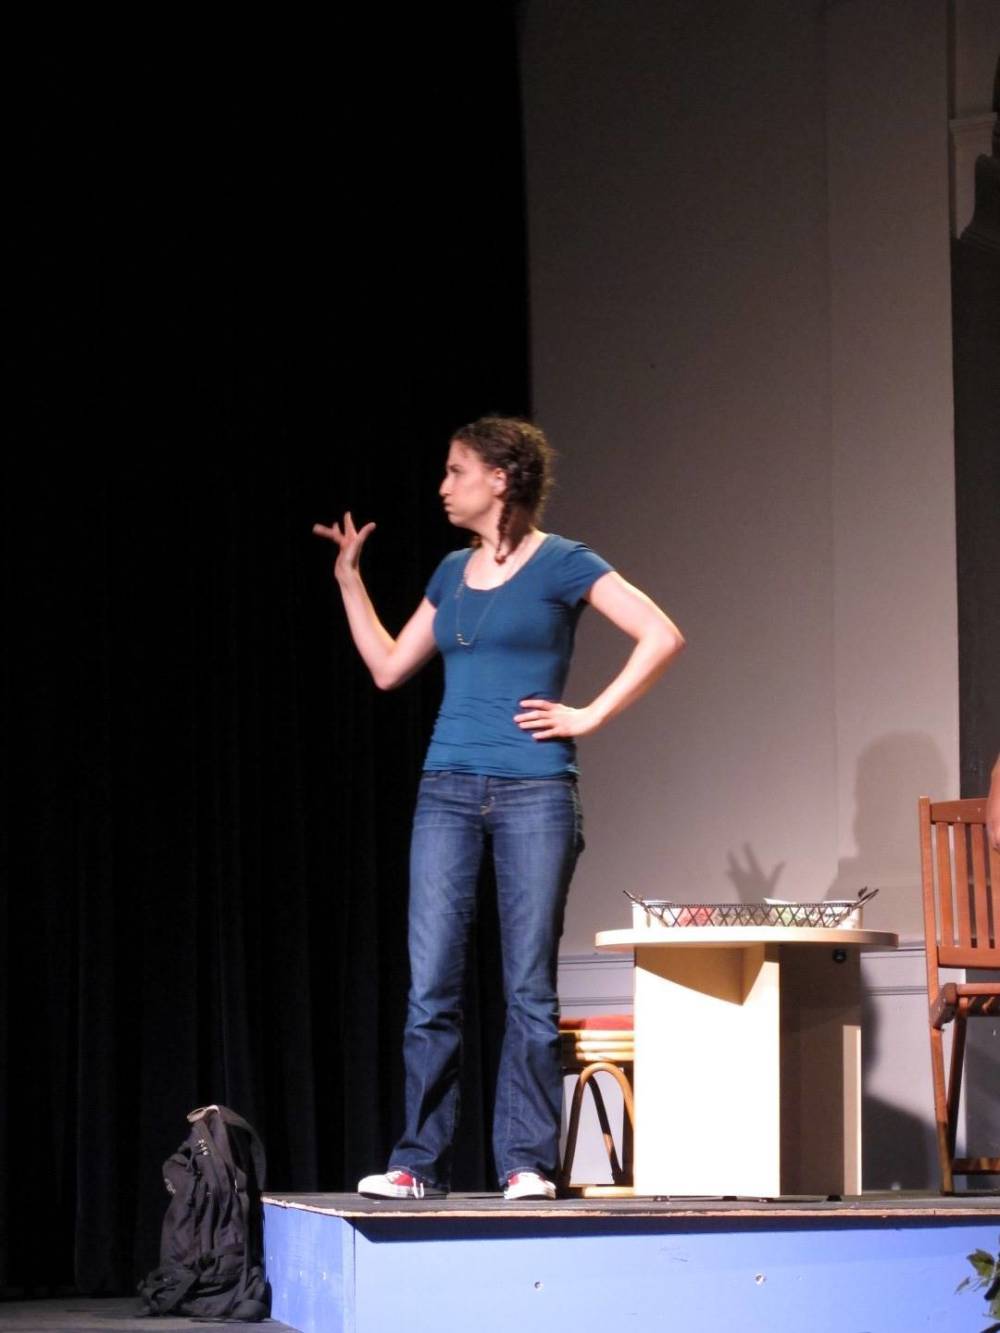 Andrea in 2012 as an actor in 'Waiting for Rosalie', a play performed entirely in American Sign Language by Deaf and hearing actors. Produced by Abused Deaf Women's Advocacy Services as part of Sexual Assult Awareness Month. Photo: Jason Tang